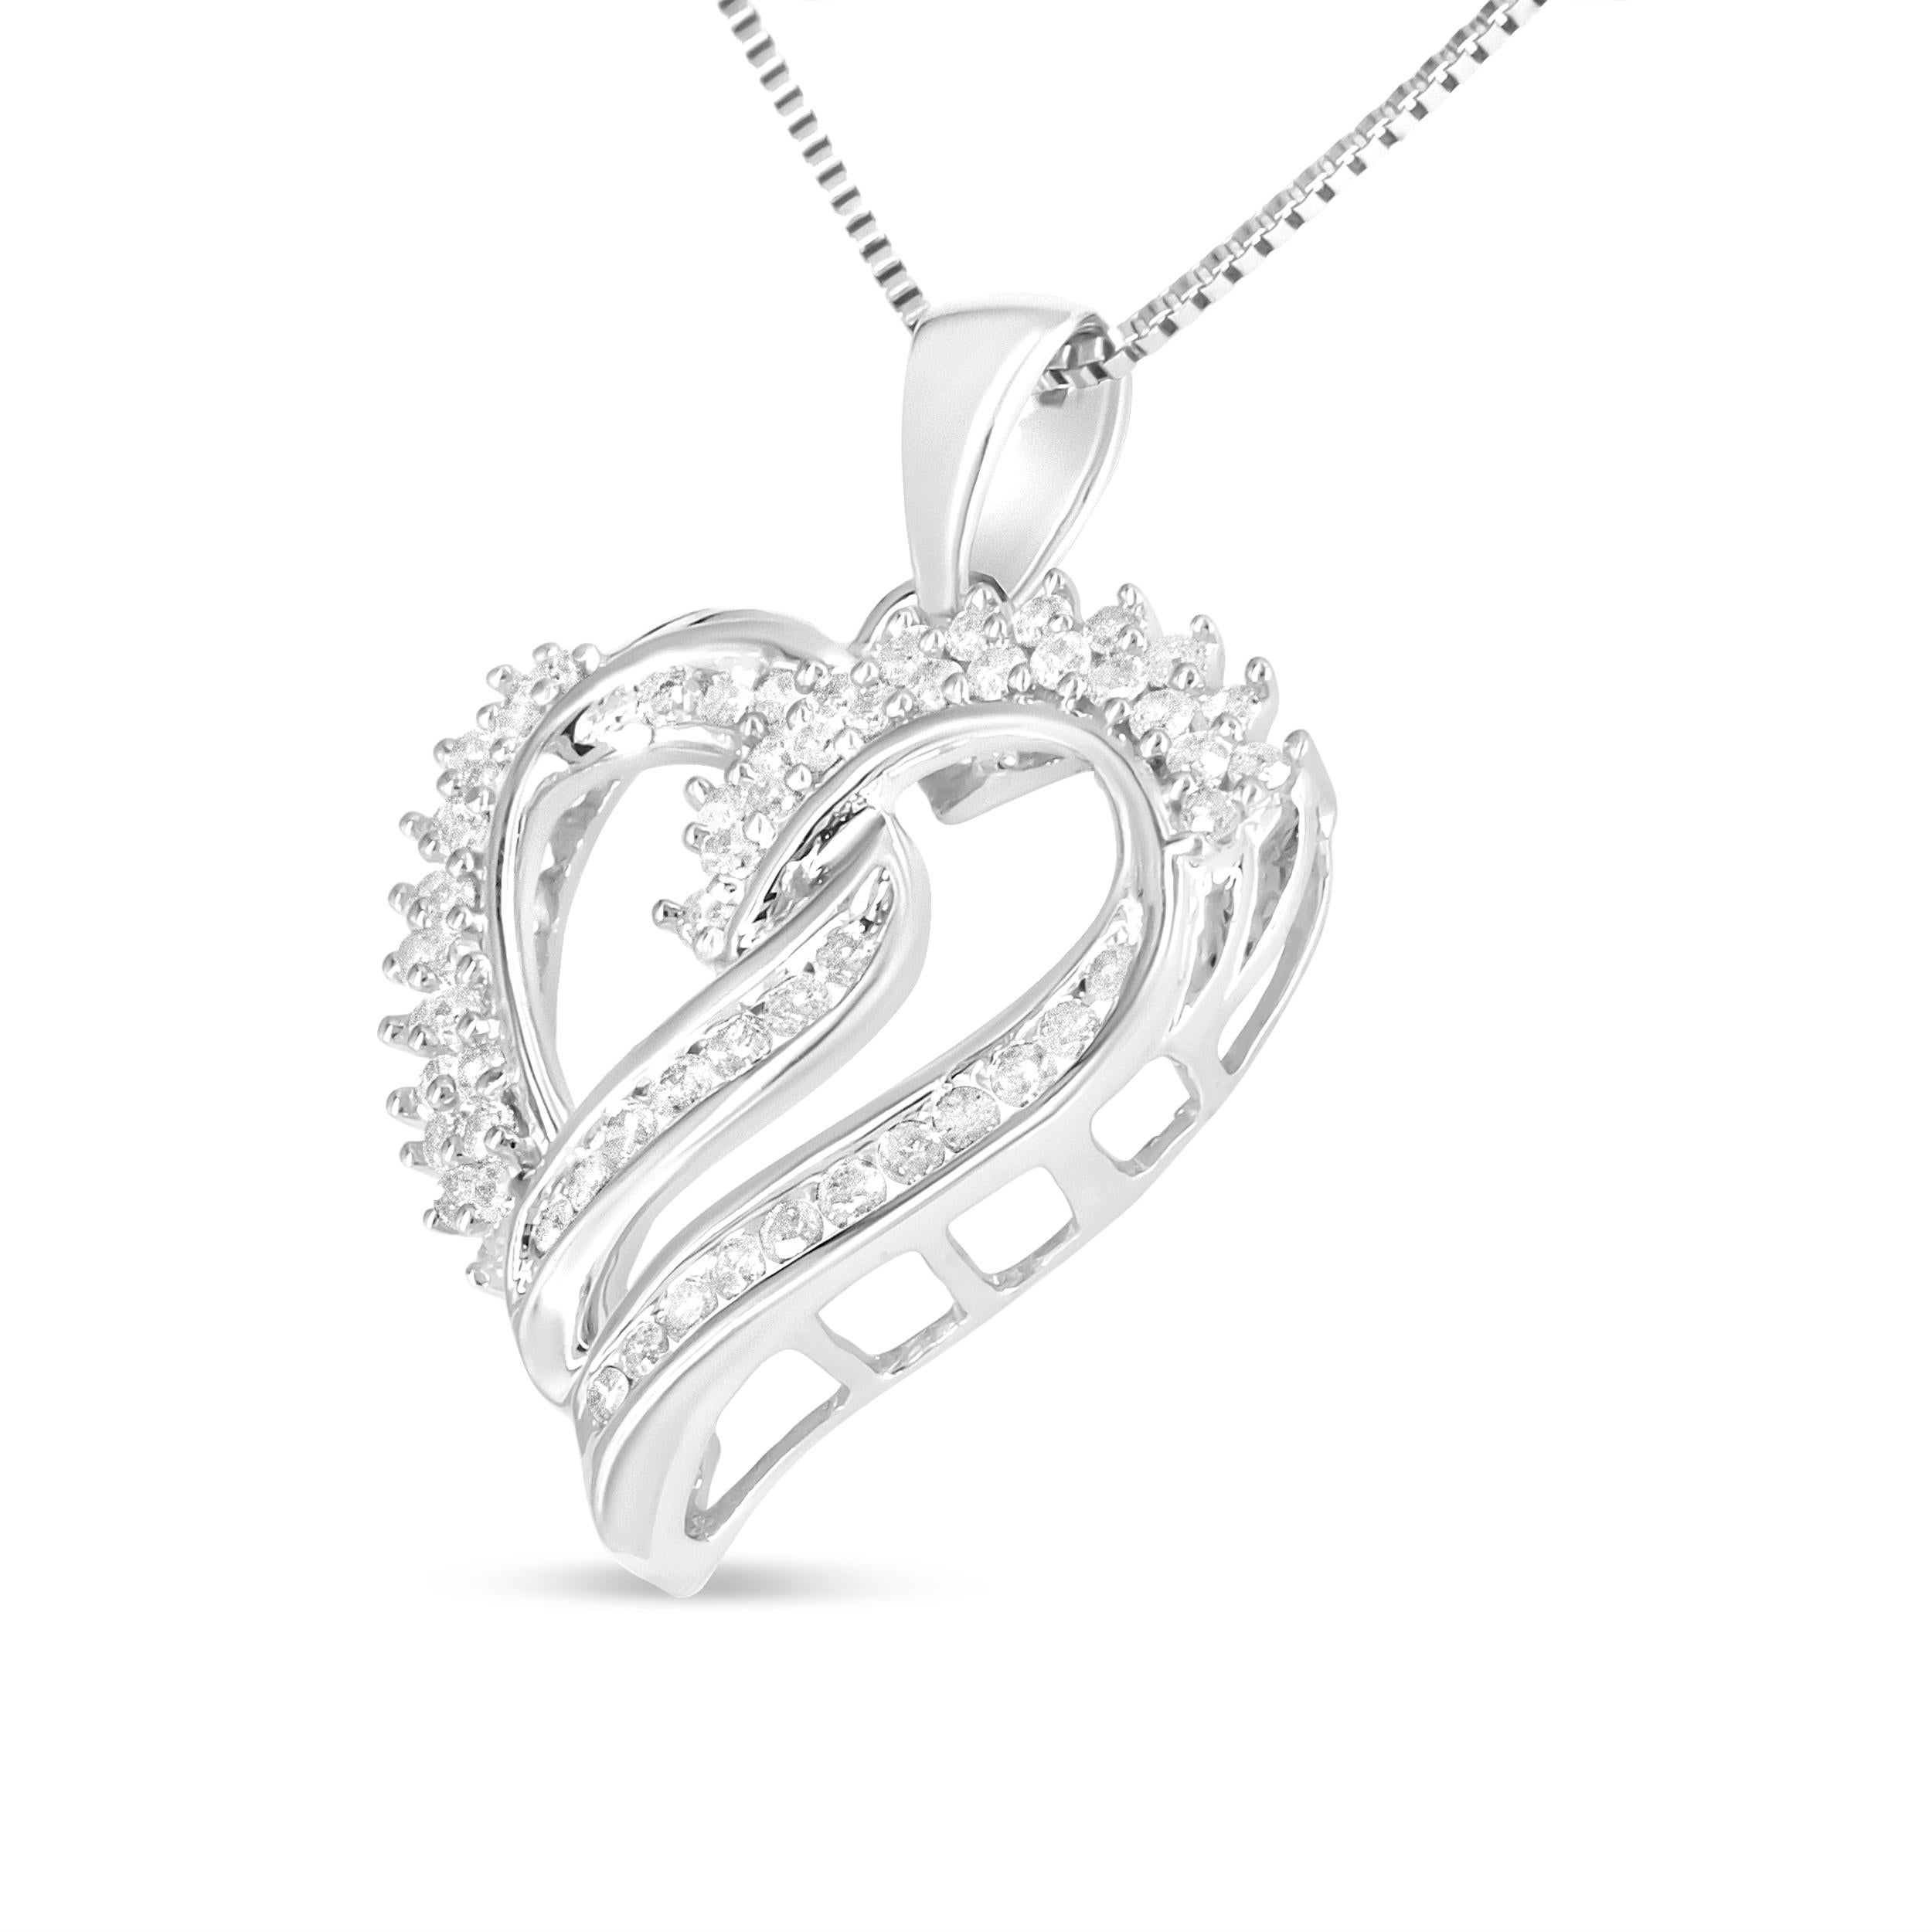 This heart pendant necklace speaks volumes of your love that features rows and loops of shimmering diamonds that beam bright rays of sparkle. The .925 sterling silver casts a ribbon-like silhouette with sculpted loops. The delicate, graceful outline